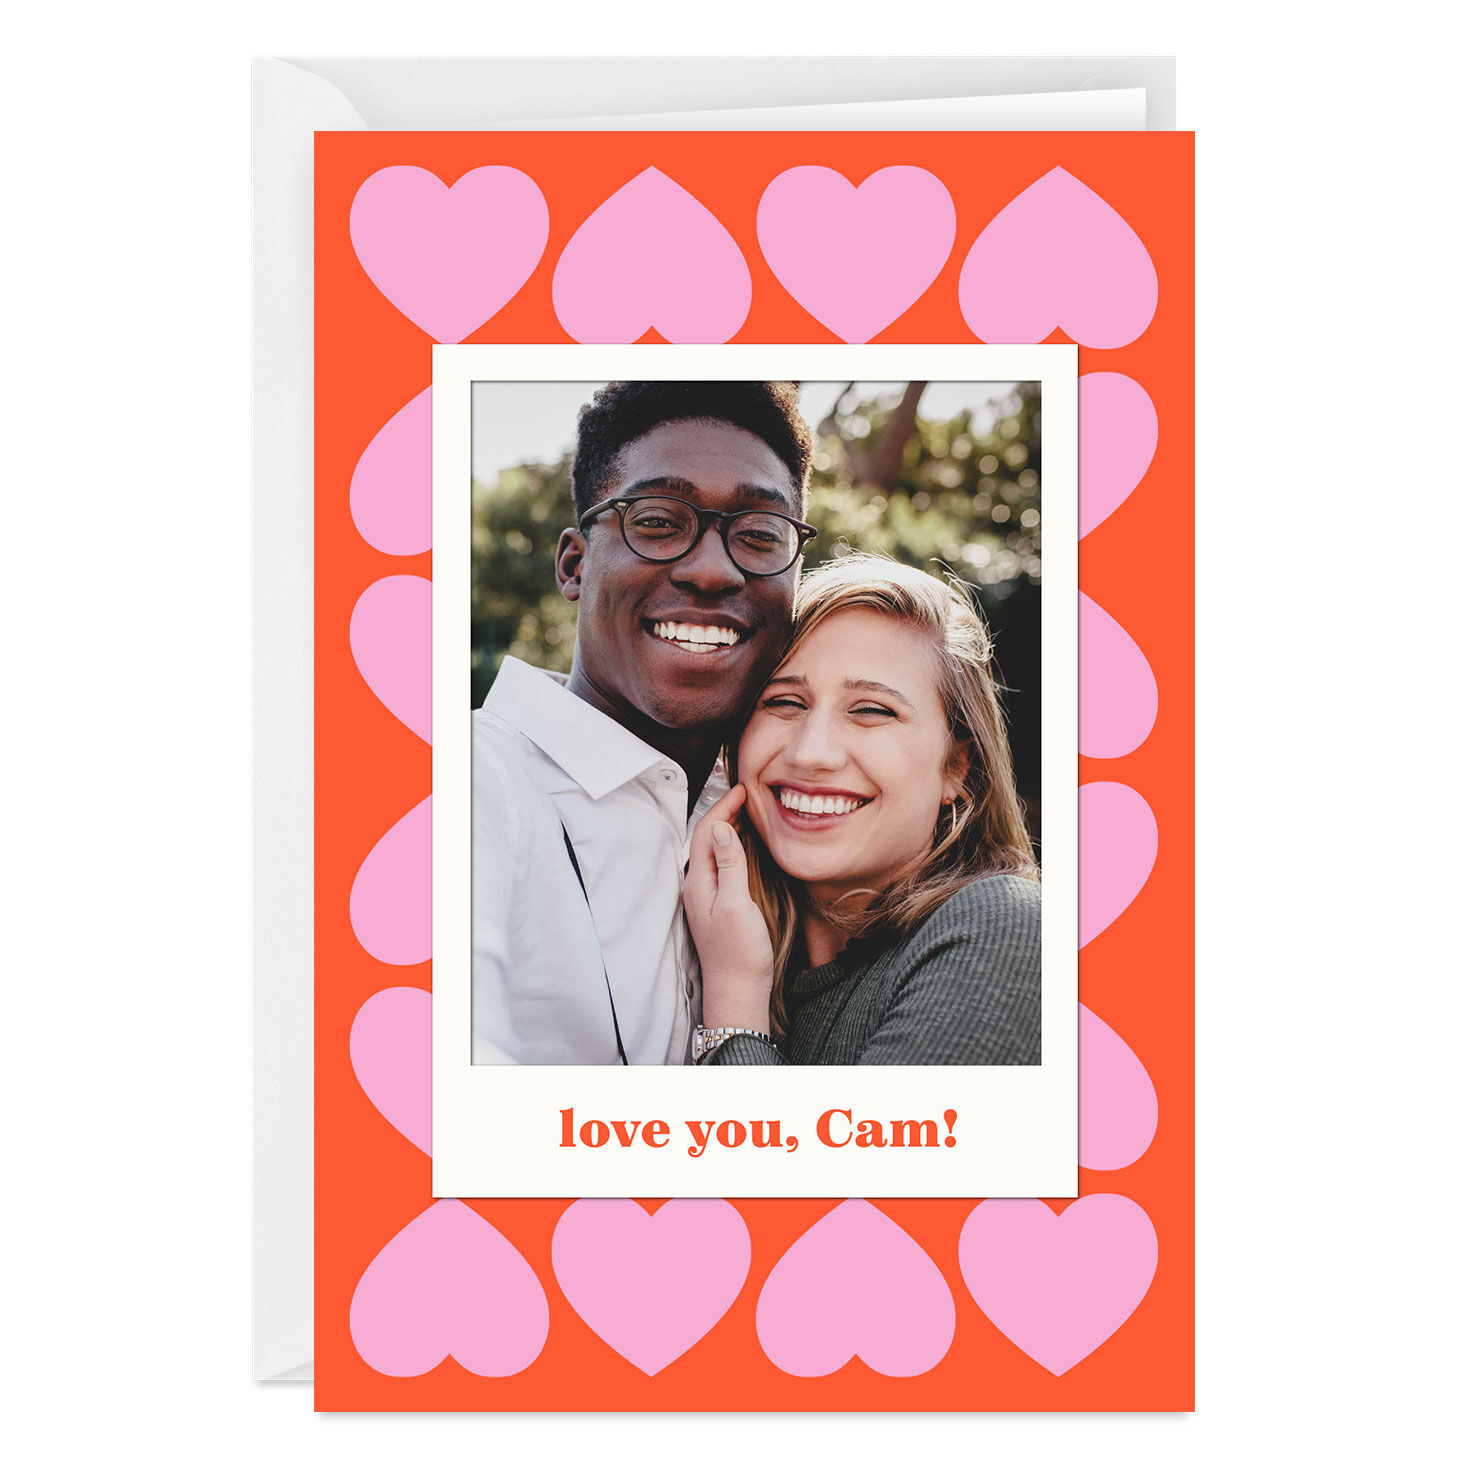 Personalized Multiple Hearts Love Photo Card for only USD 4.99 | Hallmark